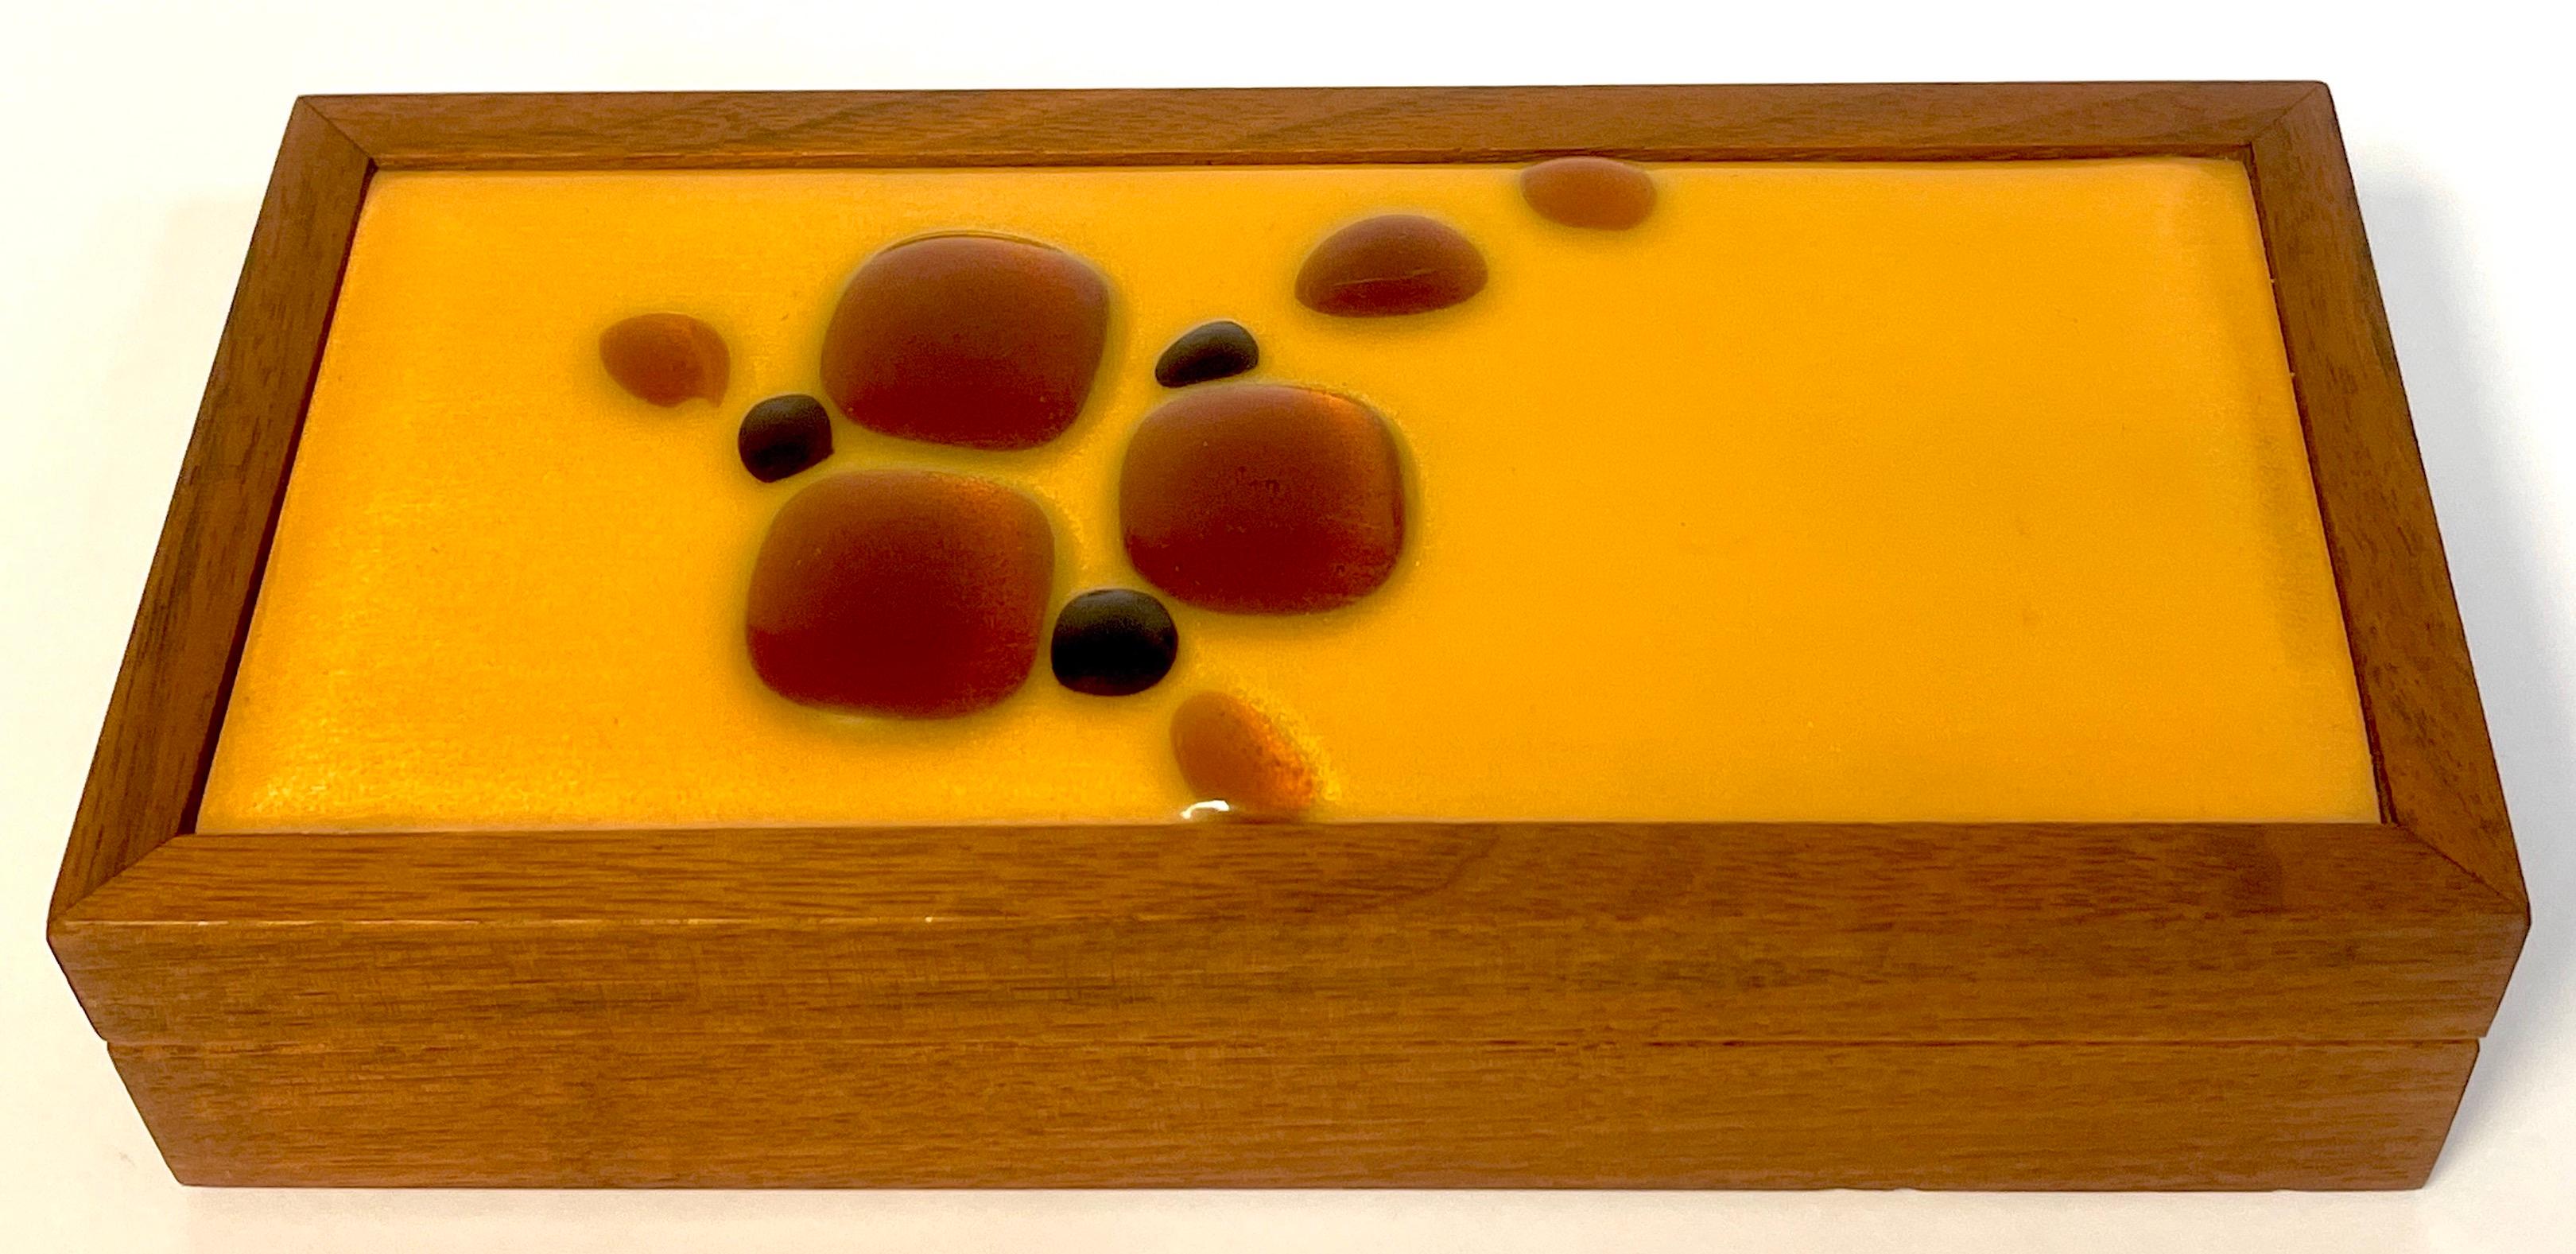 Danish modern enameled abstract teak table box
We are pleased to offer 
a Danish modern enameled abstract teak table box, this rectangular piece combines functionality and artistic expression. The top of the box features an inset enamel on copper